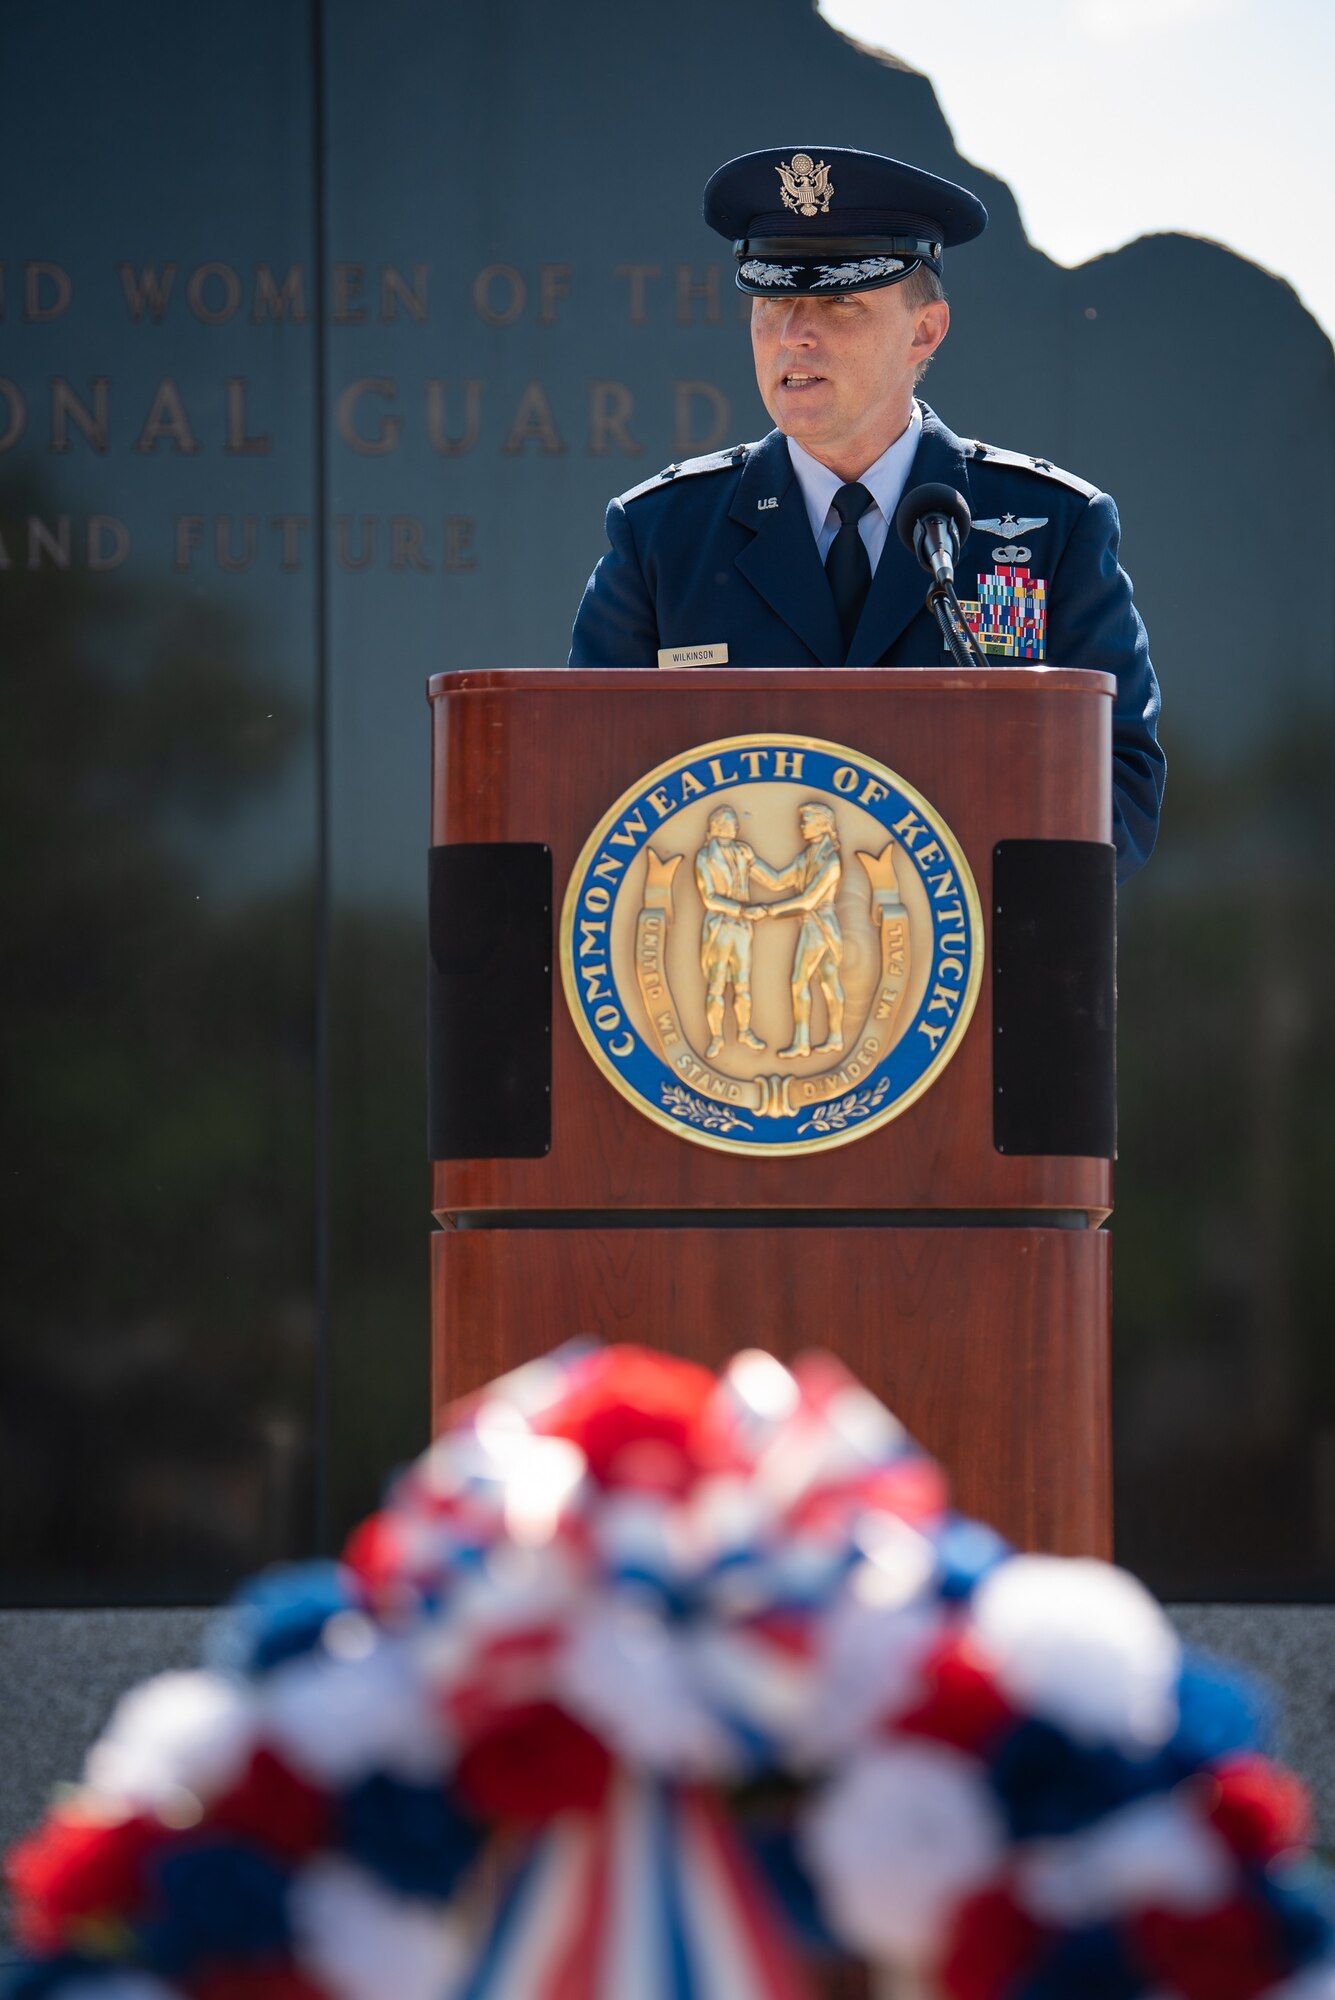 Air Force Brig. Gen. Jeffrey L. Wilkinson, the Kentucky National Guard’s assistant adjutant general for Air, speaks to the audience at a memorial service held in Frankfort, Ky., May 30, 2022, honoring members of the Kentucky Guard who have died in the line of duty. The names of 13 Soldiers were added to the Kentucky National Guard Memorial at Boone National Guard Center this year, bringing the total number of fallen Airmen and Soldiers to 286. This year also marks the 30th anniversary of a C-130 Hercules plane crash in Evansville, Ind., that claimed the lives of five aircrew members from the Kentucky Air National Guard’s 123rd Airlift Wing. (U.S. Air National Guard photo by Dale Greer)